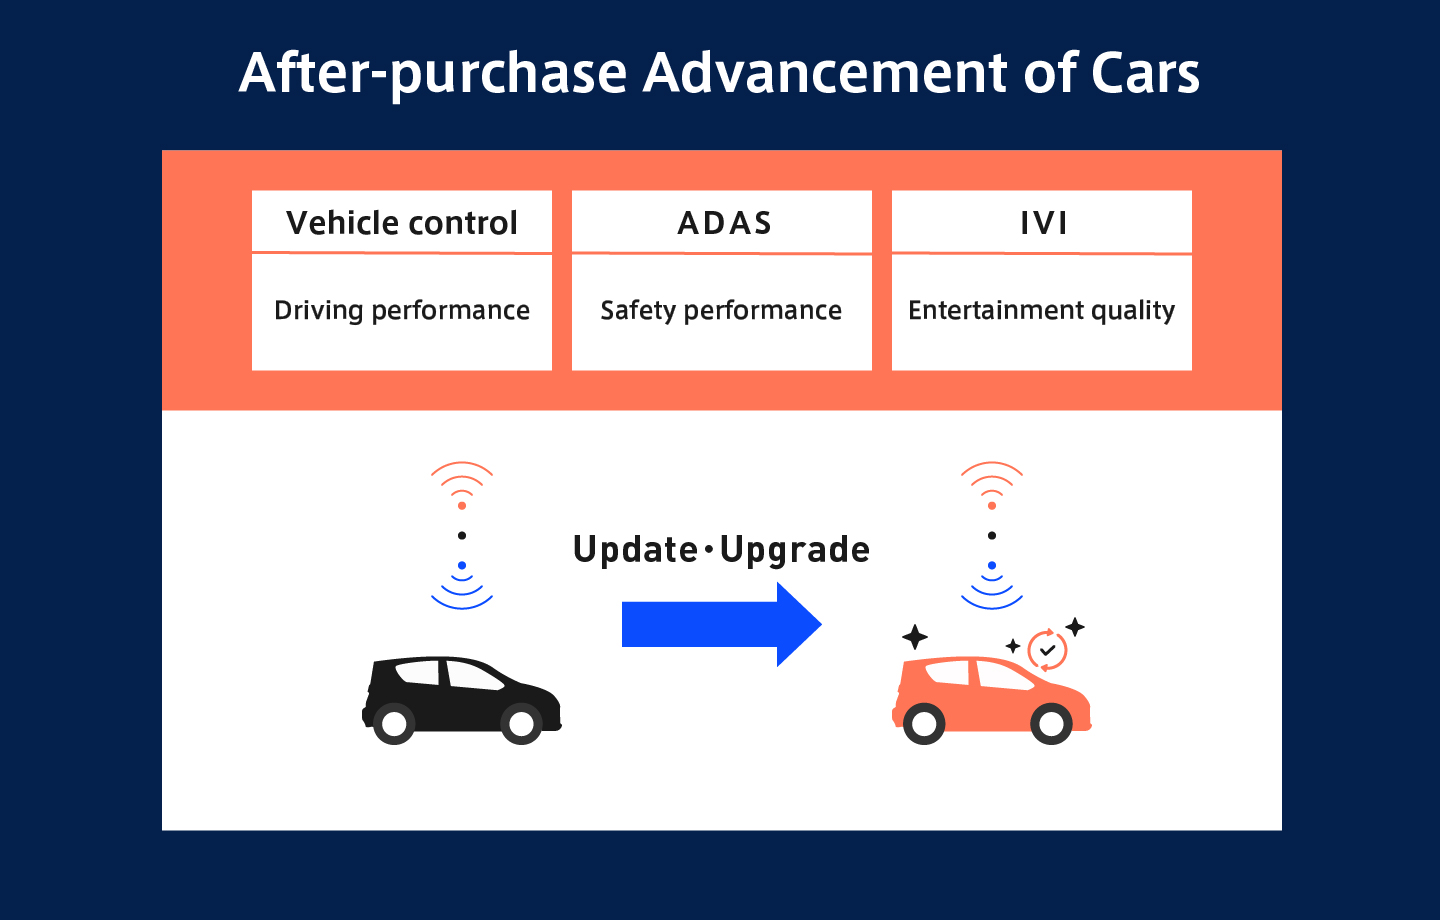 After-purchase Advancement of Cars